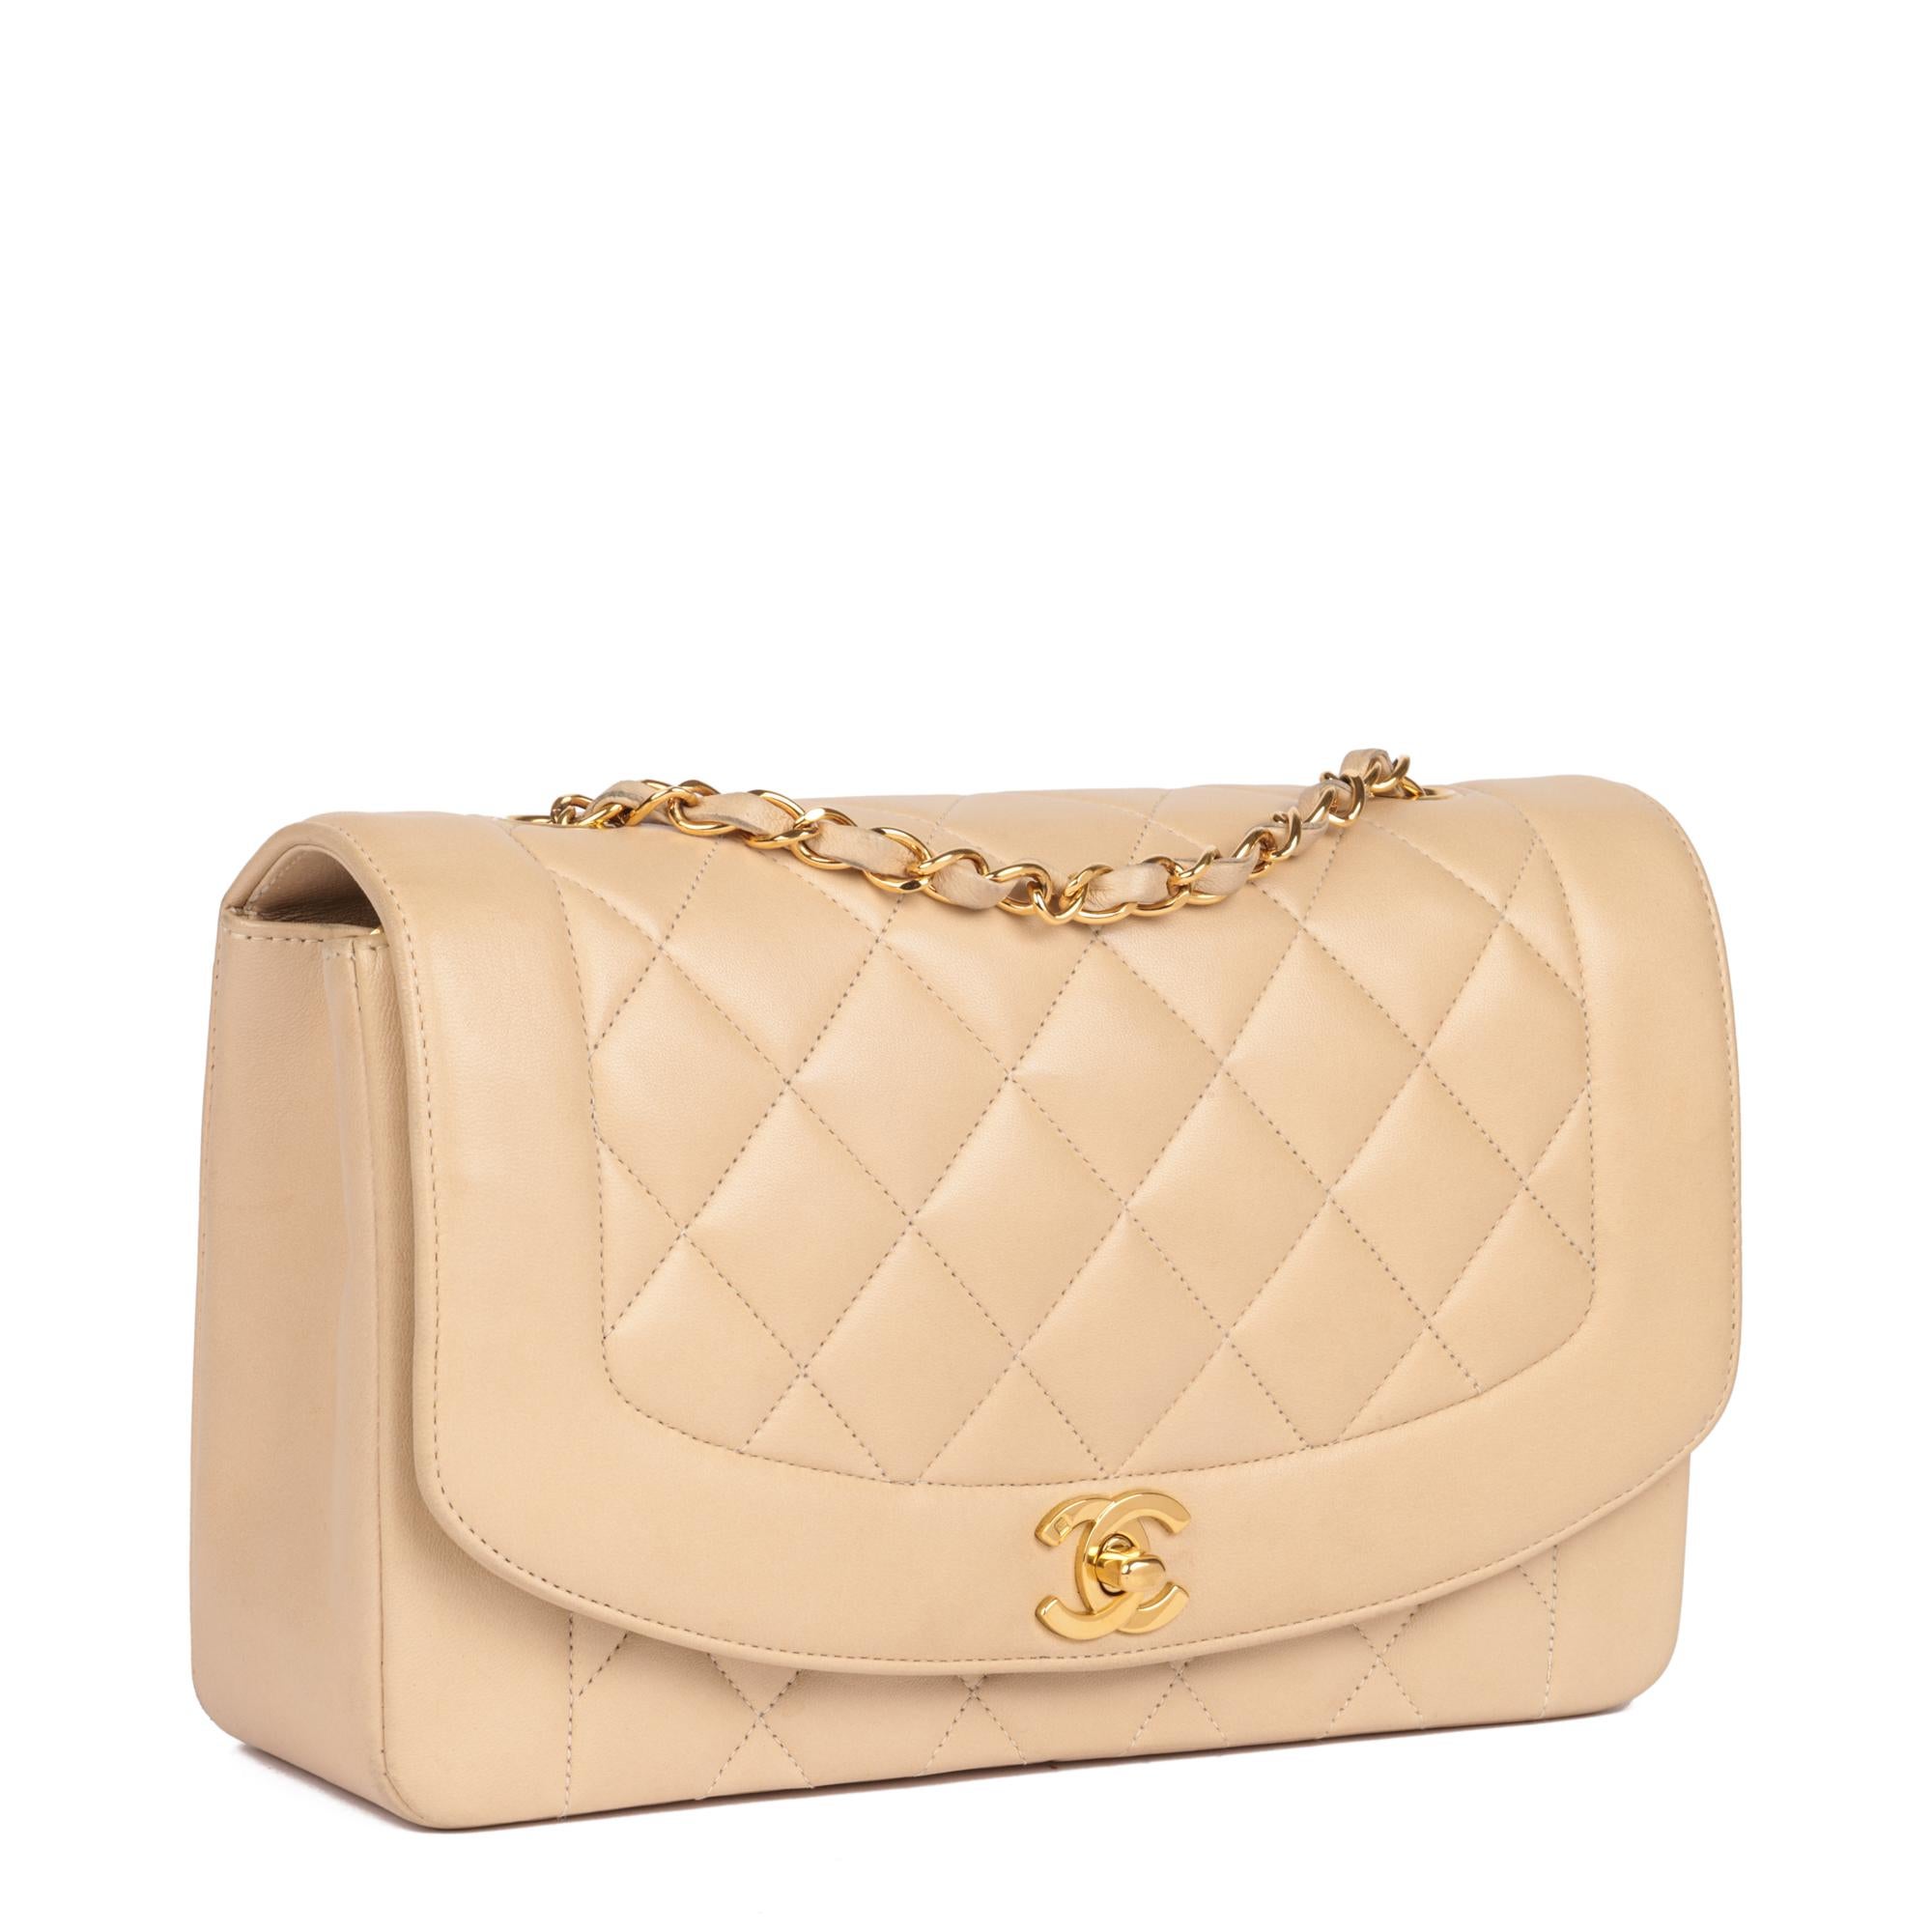 CHANEL
Beige Quilted Lambskin Vintage Medium Diana Classic Single Flap Bag

Xupes Reference: HB5245
Serial Number: 3159272
Age (Circa): 1994
Accompanied By: Chanel Dust Bag, Authenticity Card, Care Booklet
Authenticity Details: Authenticity Card,